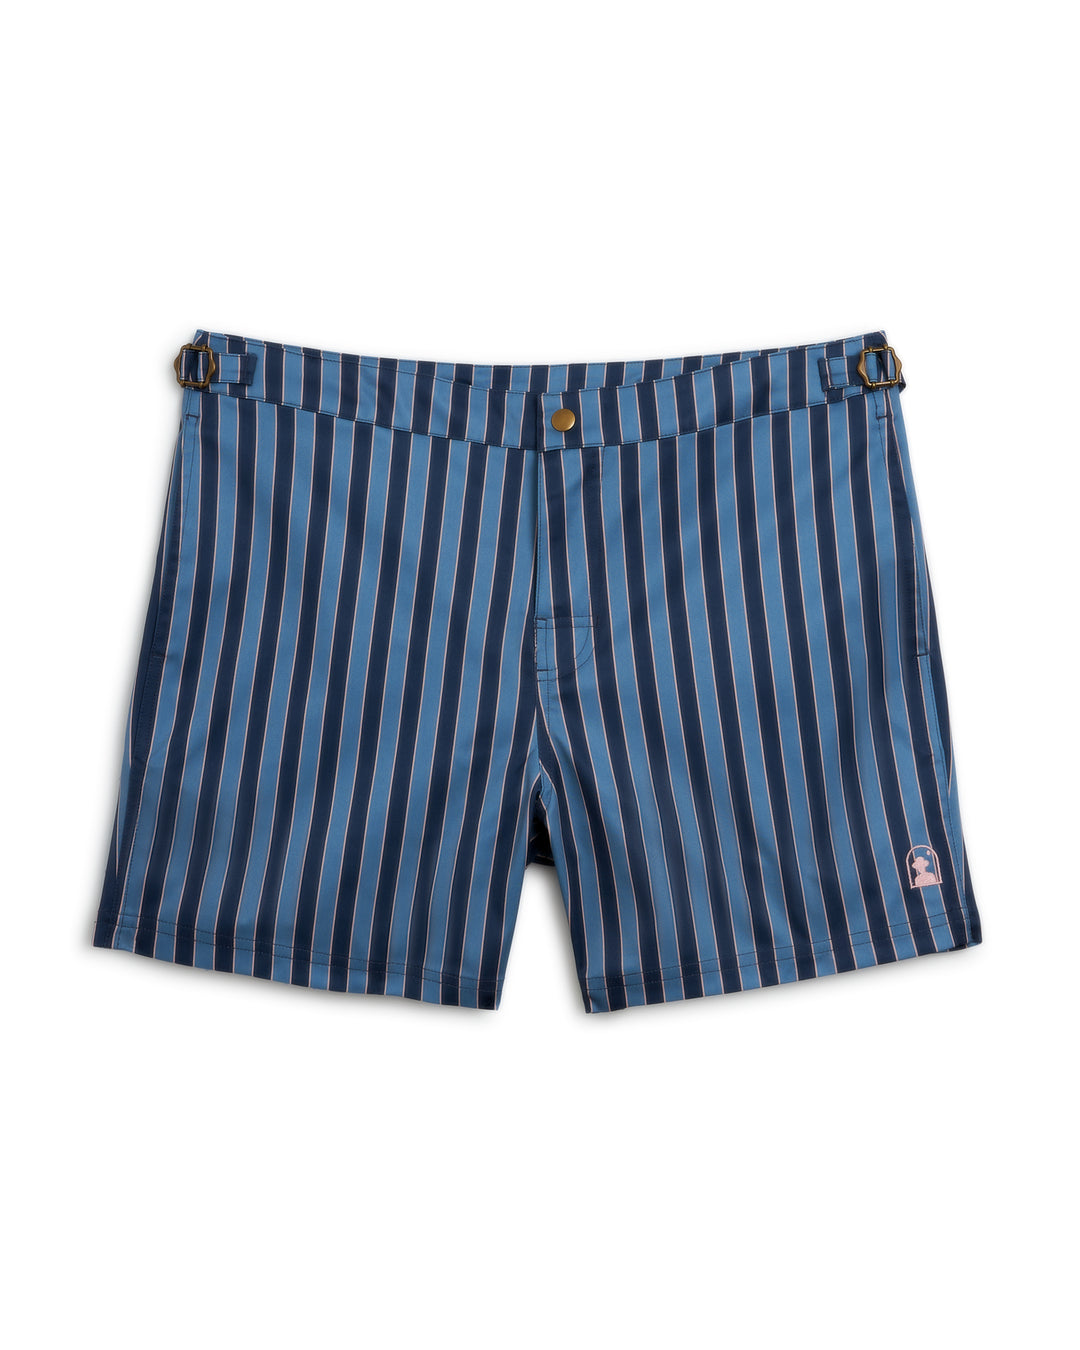 These men's Mallorca Swim-Walk Shorts by Dandy Del Mar feature a blue and black striped design with adjustable antique brass side fasteners for a comfortable fit. Made with single layer nylon construction, these swim trunks are perfect for your summer adventures.